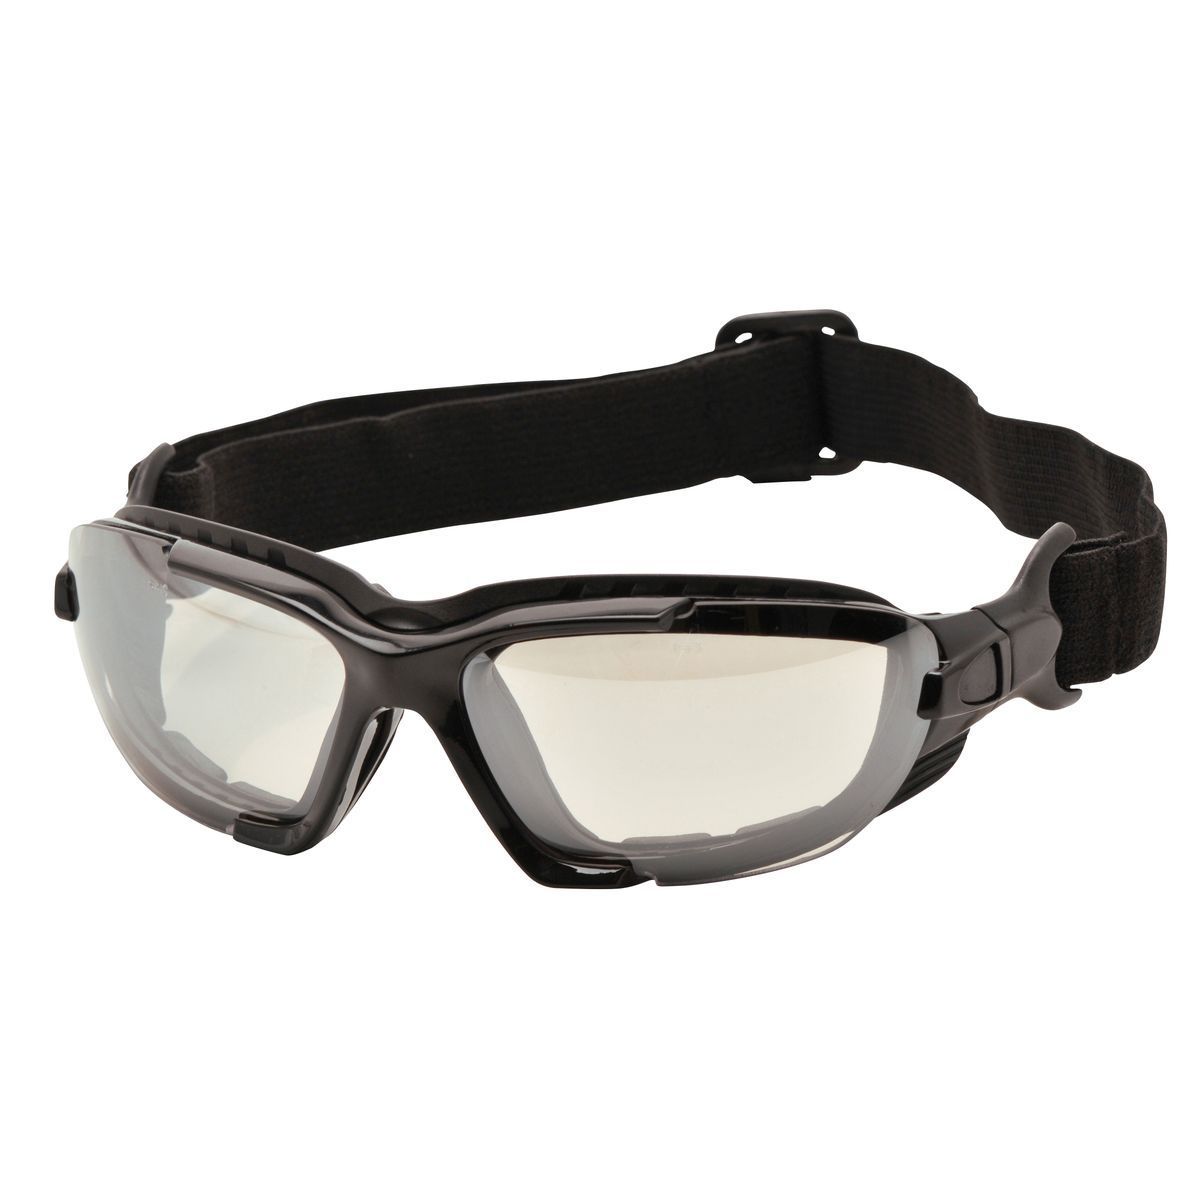 Style PW11 Levo Safety Spectacle EN166-1